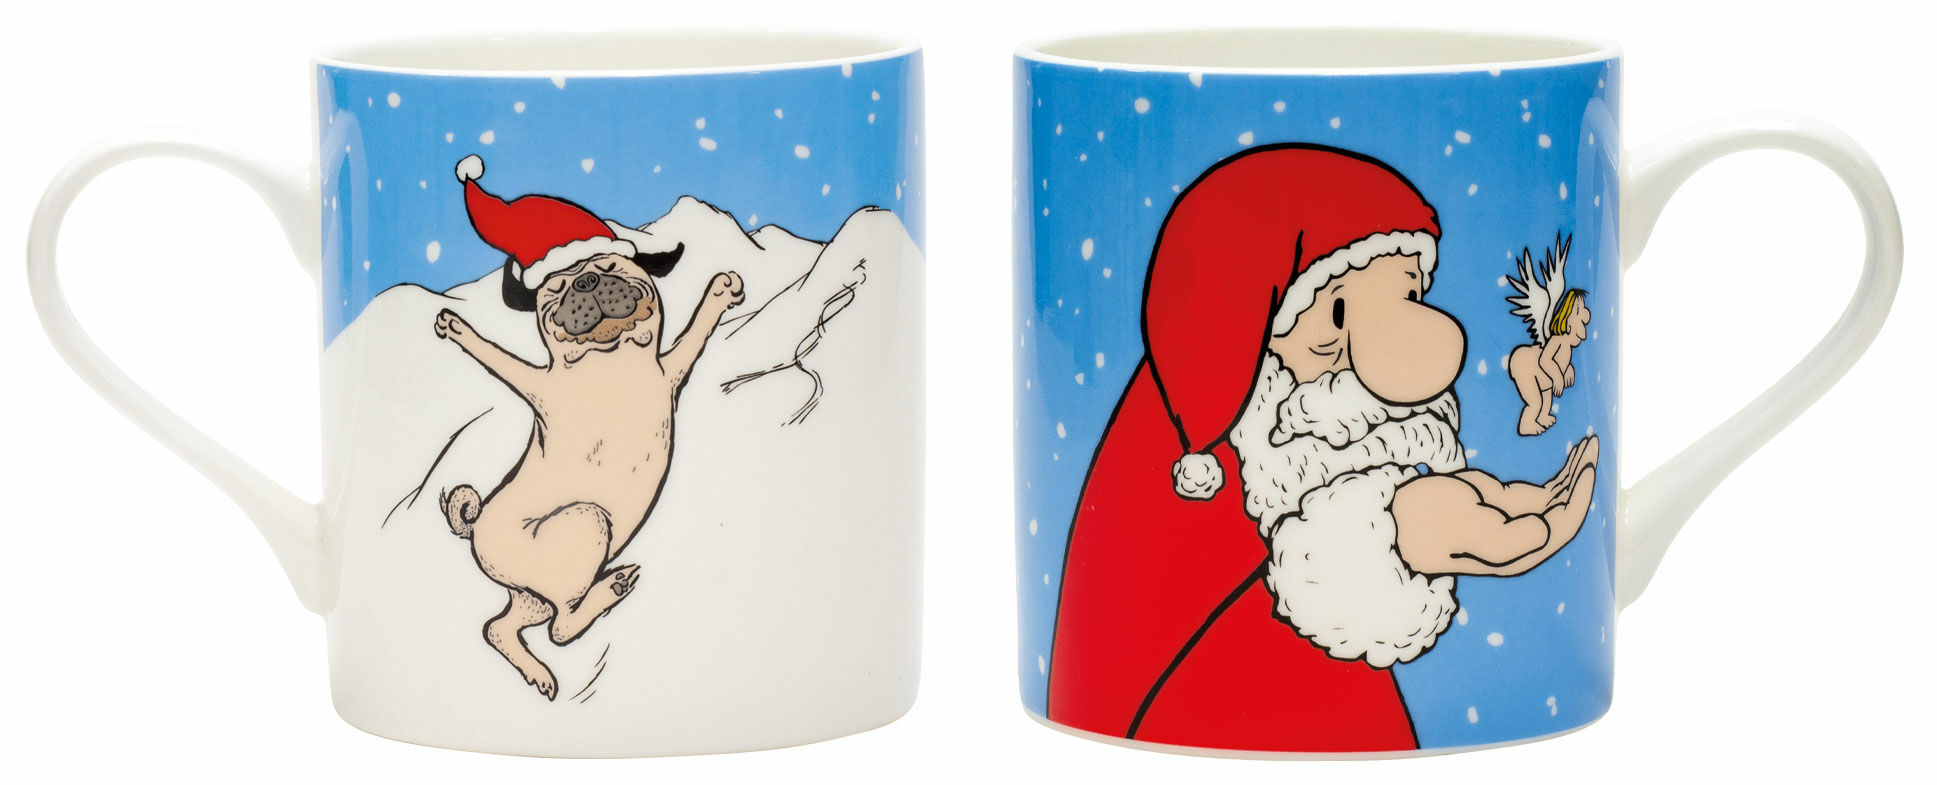 Set of 2 mugs with artist's motifs "Christmas Pug" & "Santa Claus", porcelain by Loriot